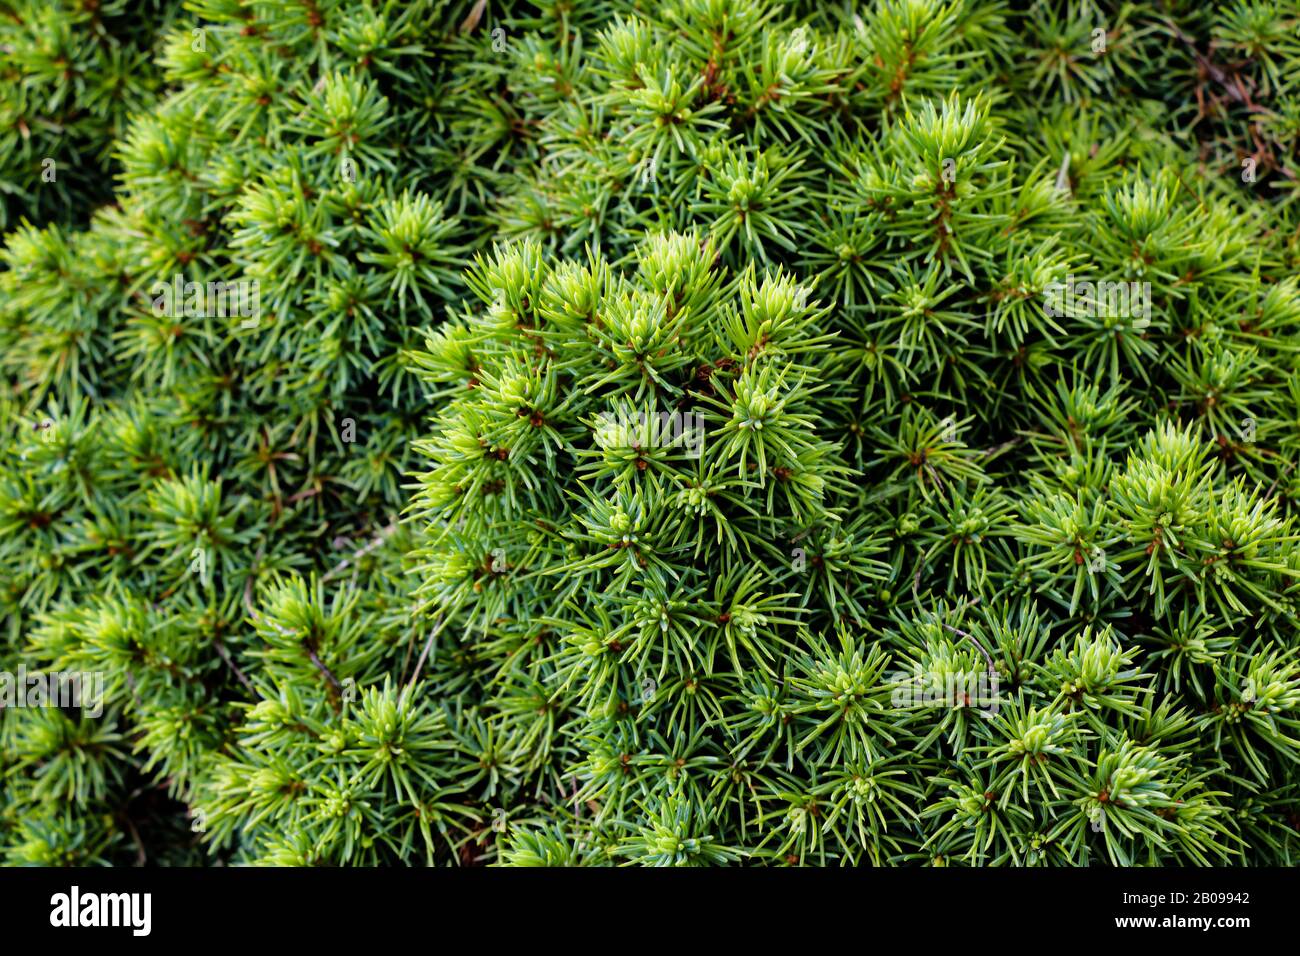 green prickly branches of a fur-tree or pine Stock Photo